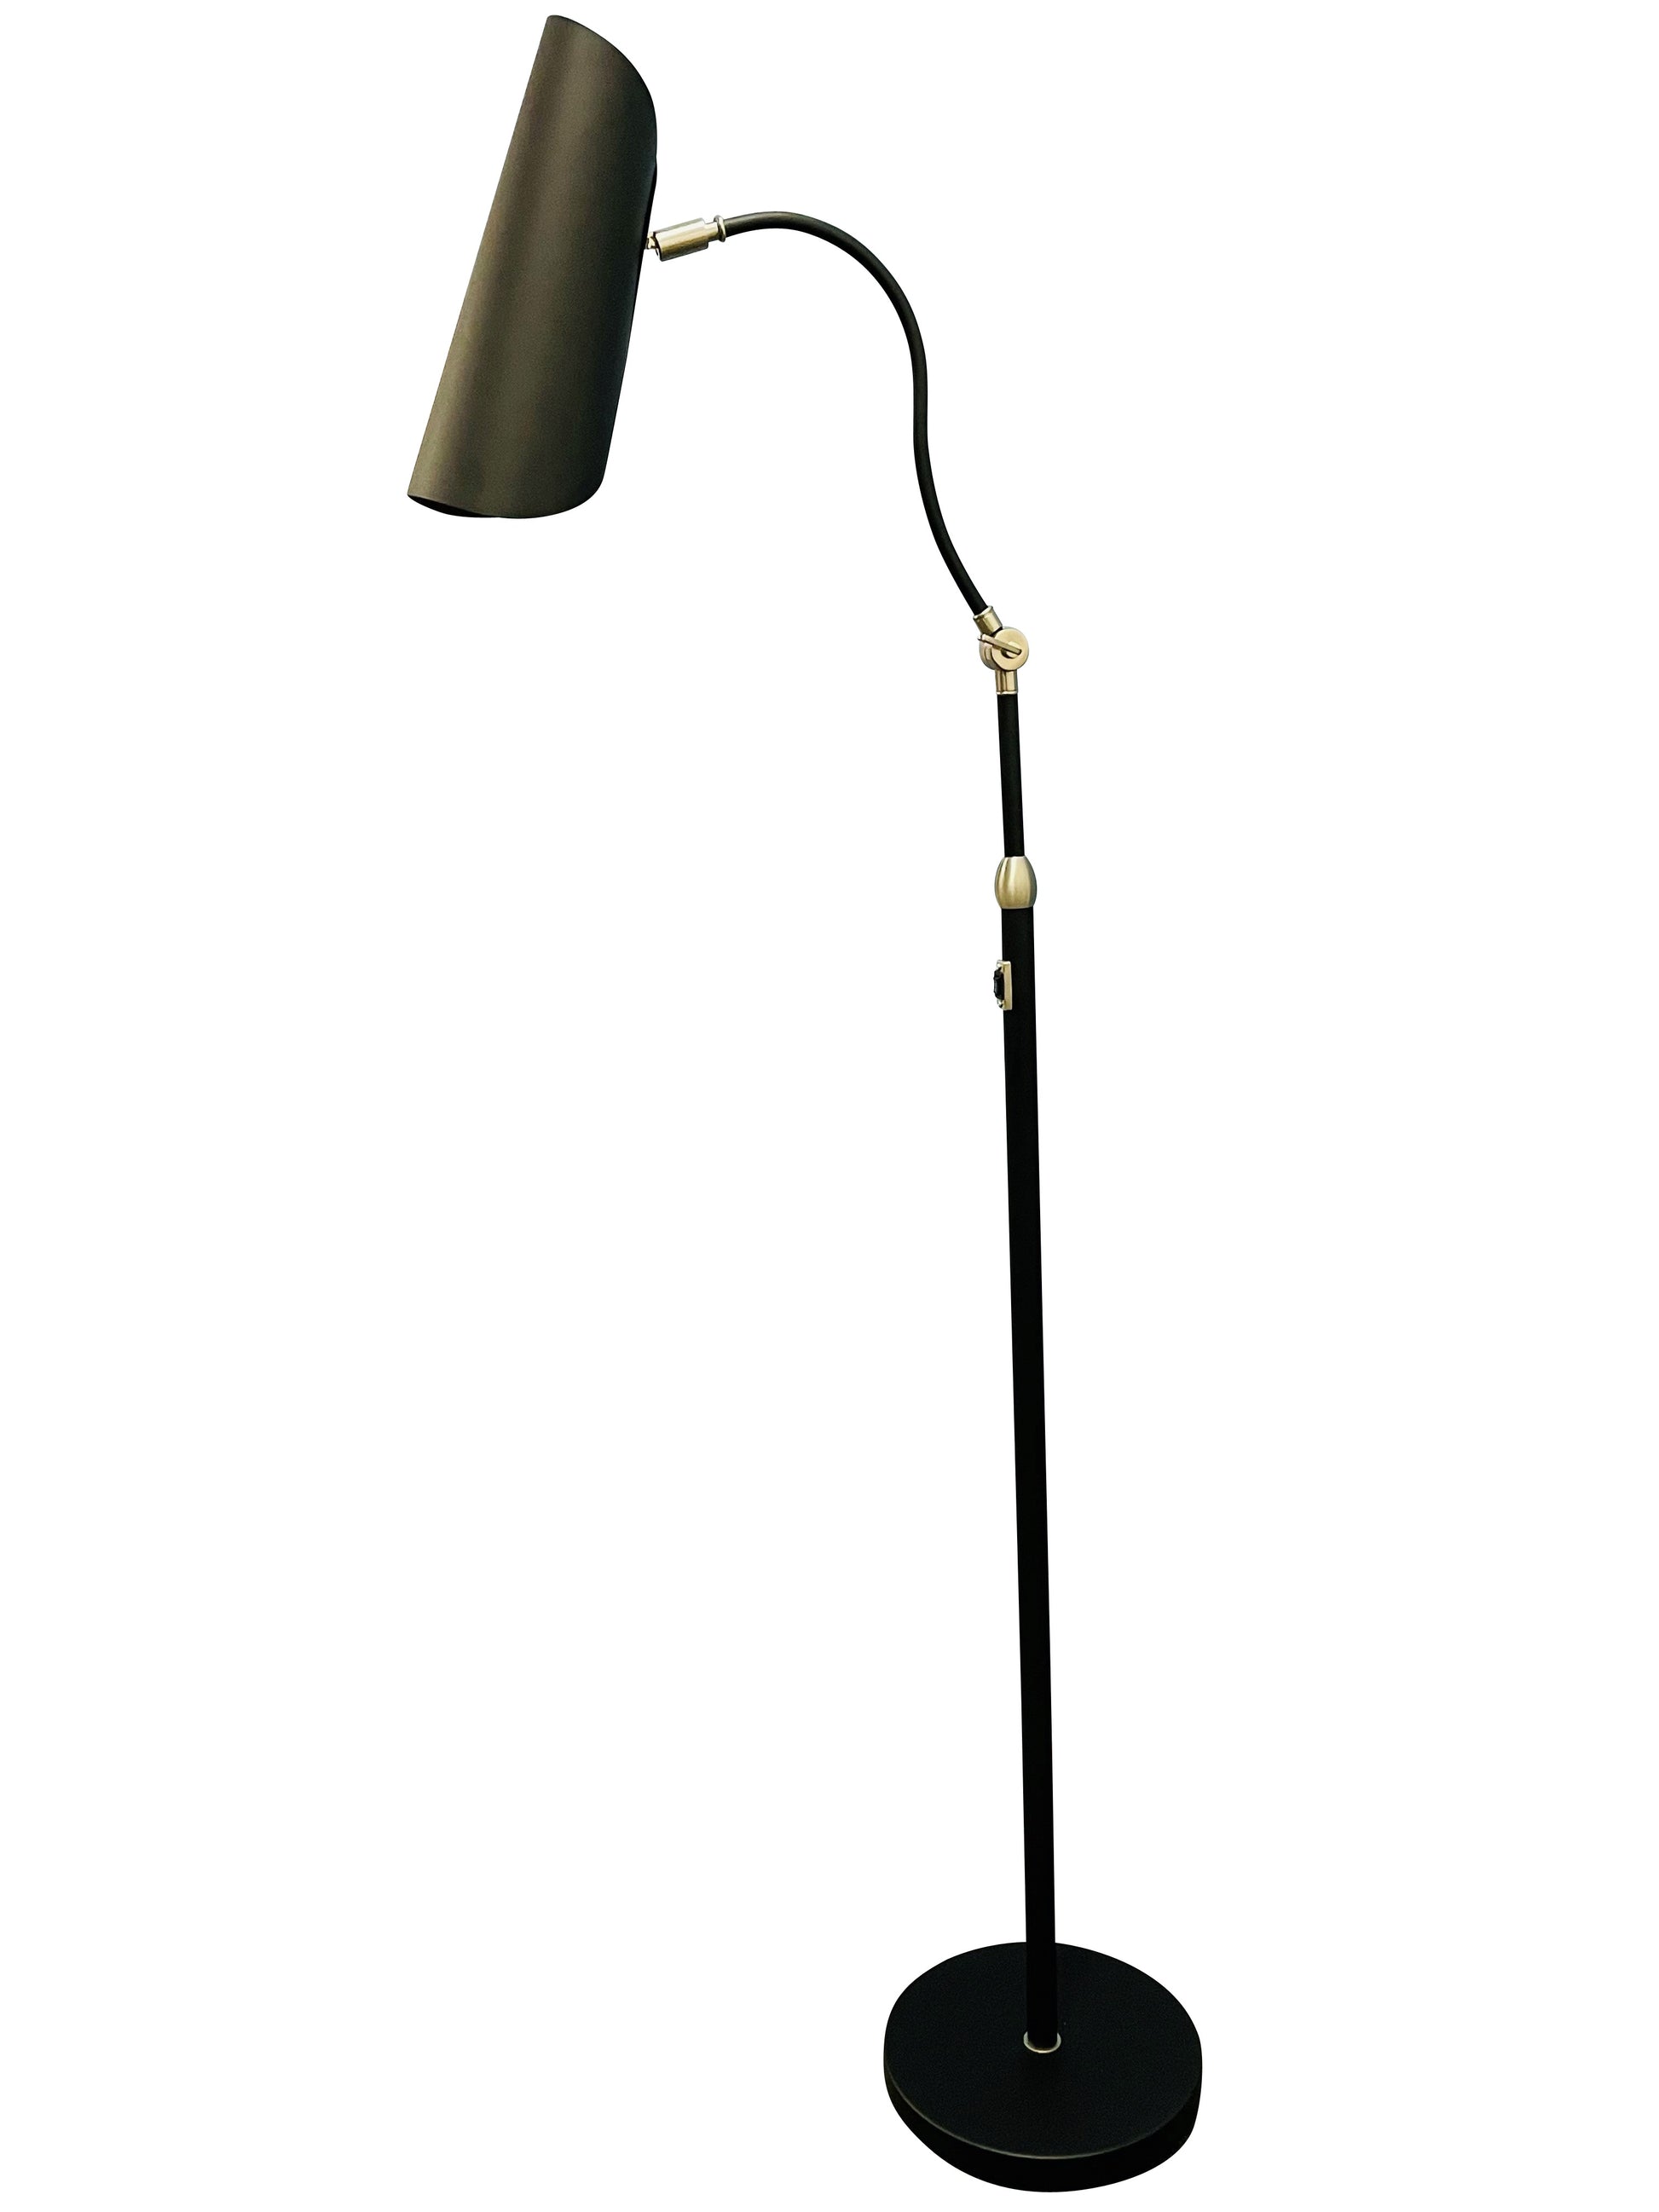 House of Troy Logan Black/Satin Nickel Floor Lamp with rolled shade L300-BLKSN